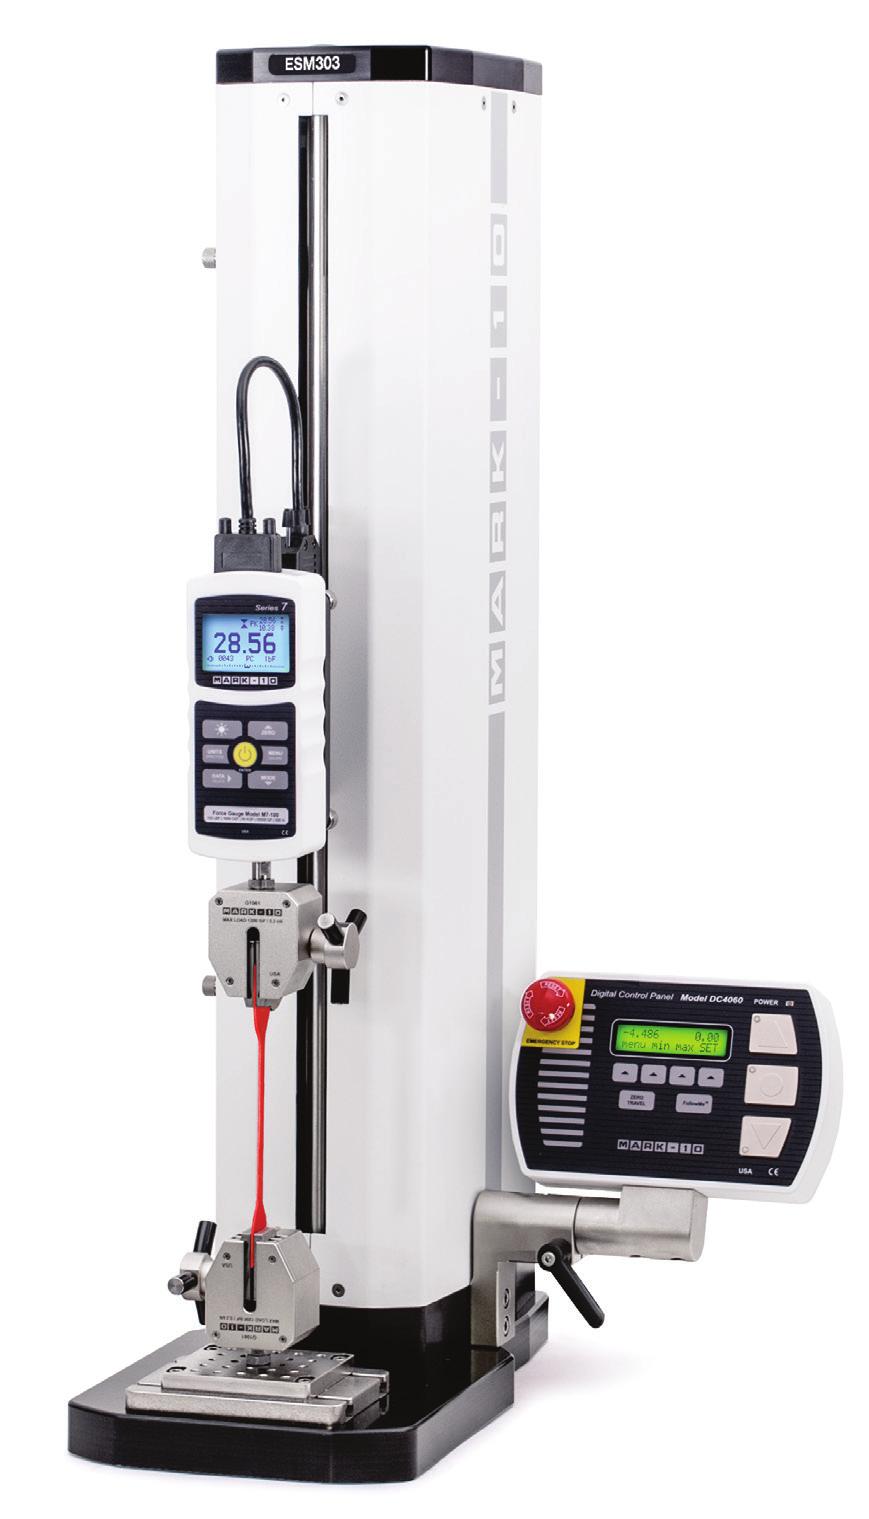 Page 1 of 5 The ESM303 is a highly configurable single-column force tester for tension and compression measurement applications up to 300 lbf [1.